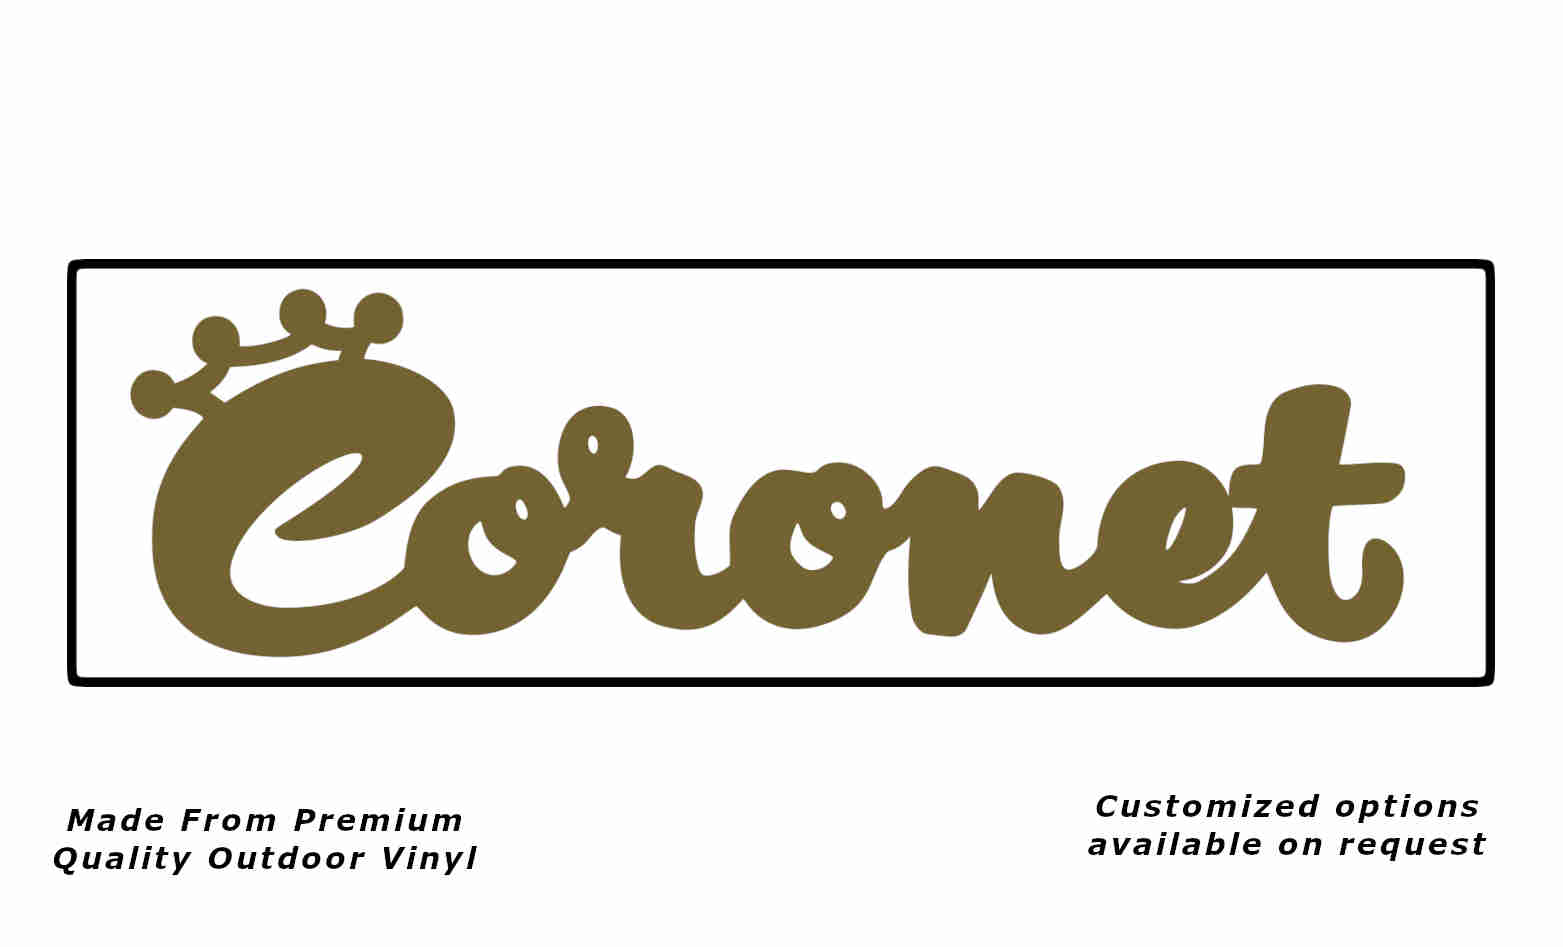 Coronet with border caravan replacement vinyl decal sticker in gold and black.